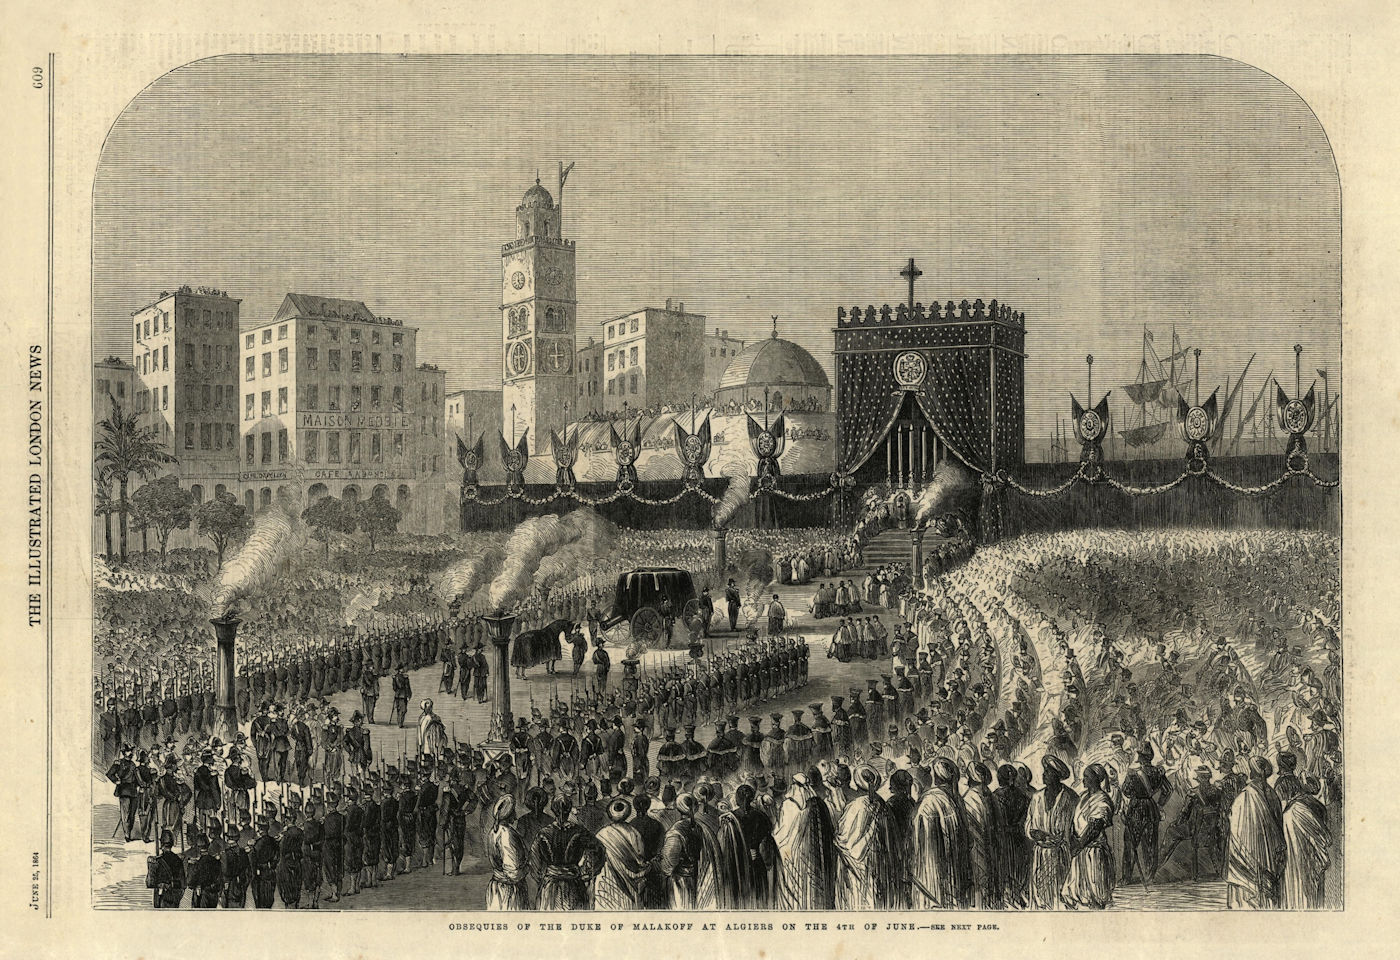 Associate Product Obsequies of the Duke of Malakhov at Algiers on the 4th of June. Algeria 1864